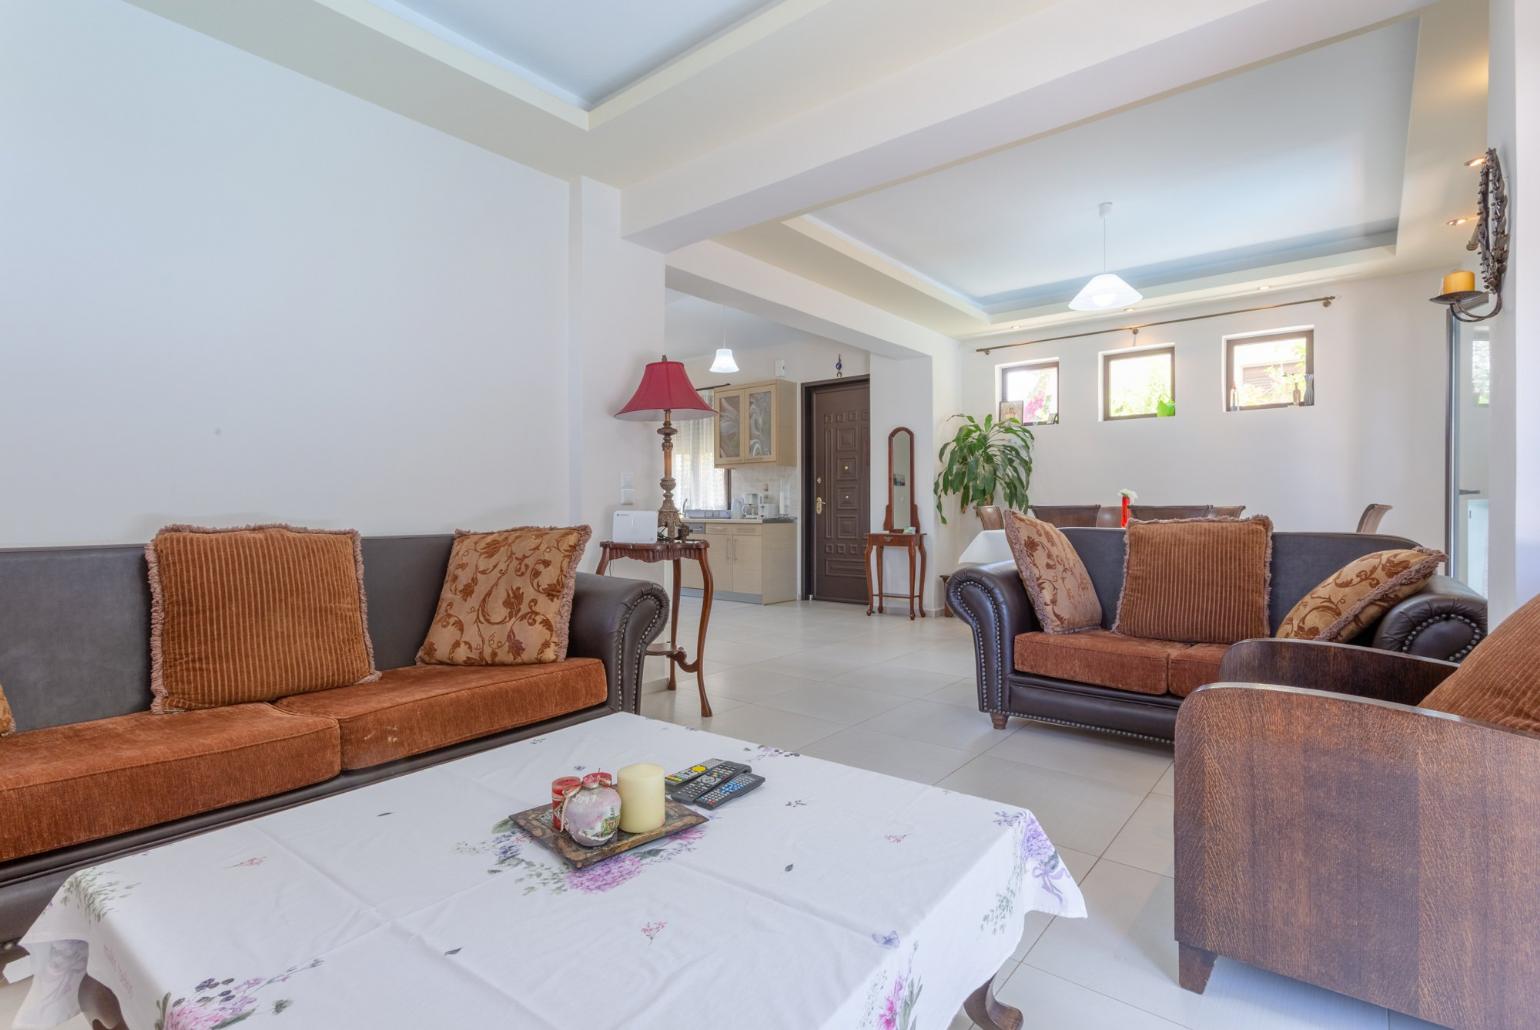 Open-plan living room with dining area, kitchen, A/C, WiFi Internet, Satellite TV, and pool terrace access